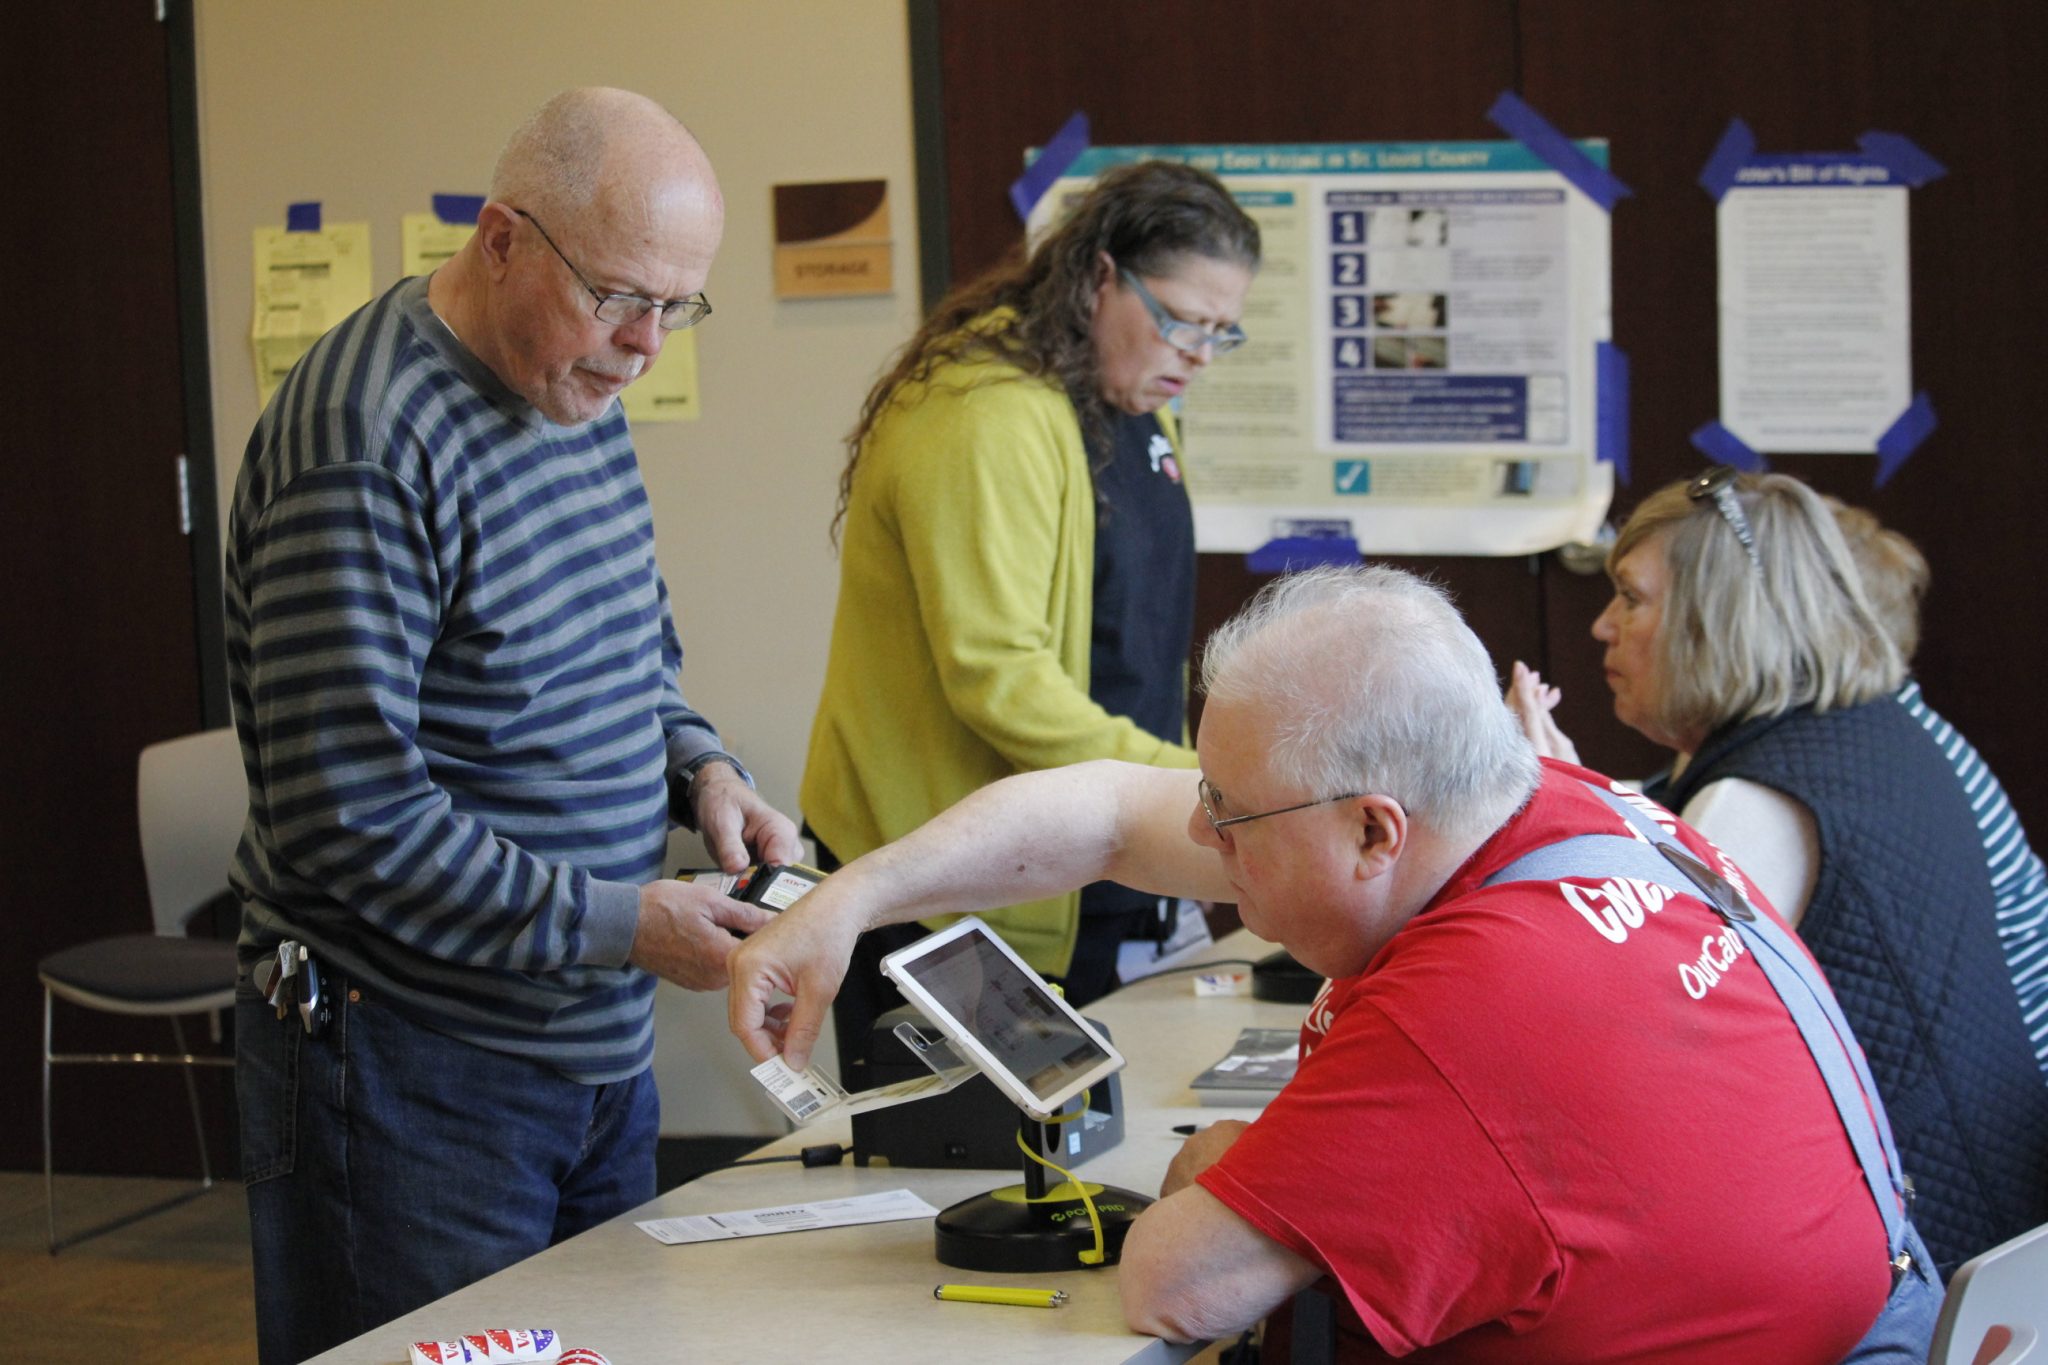 Voters check in to cast their ballots at the Sunset Hills Community Center during the April 2019 municipal election.